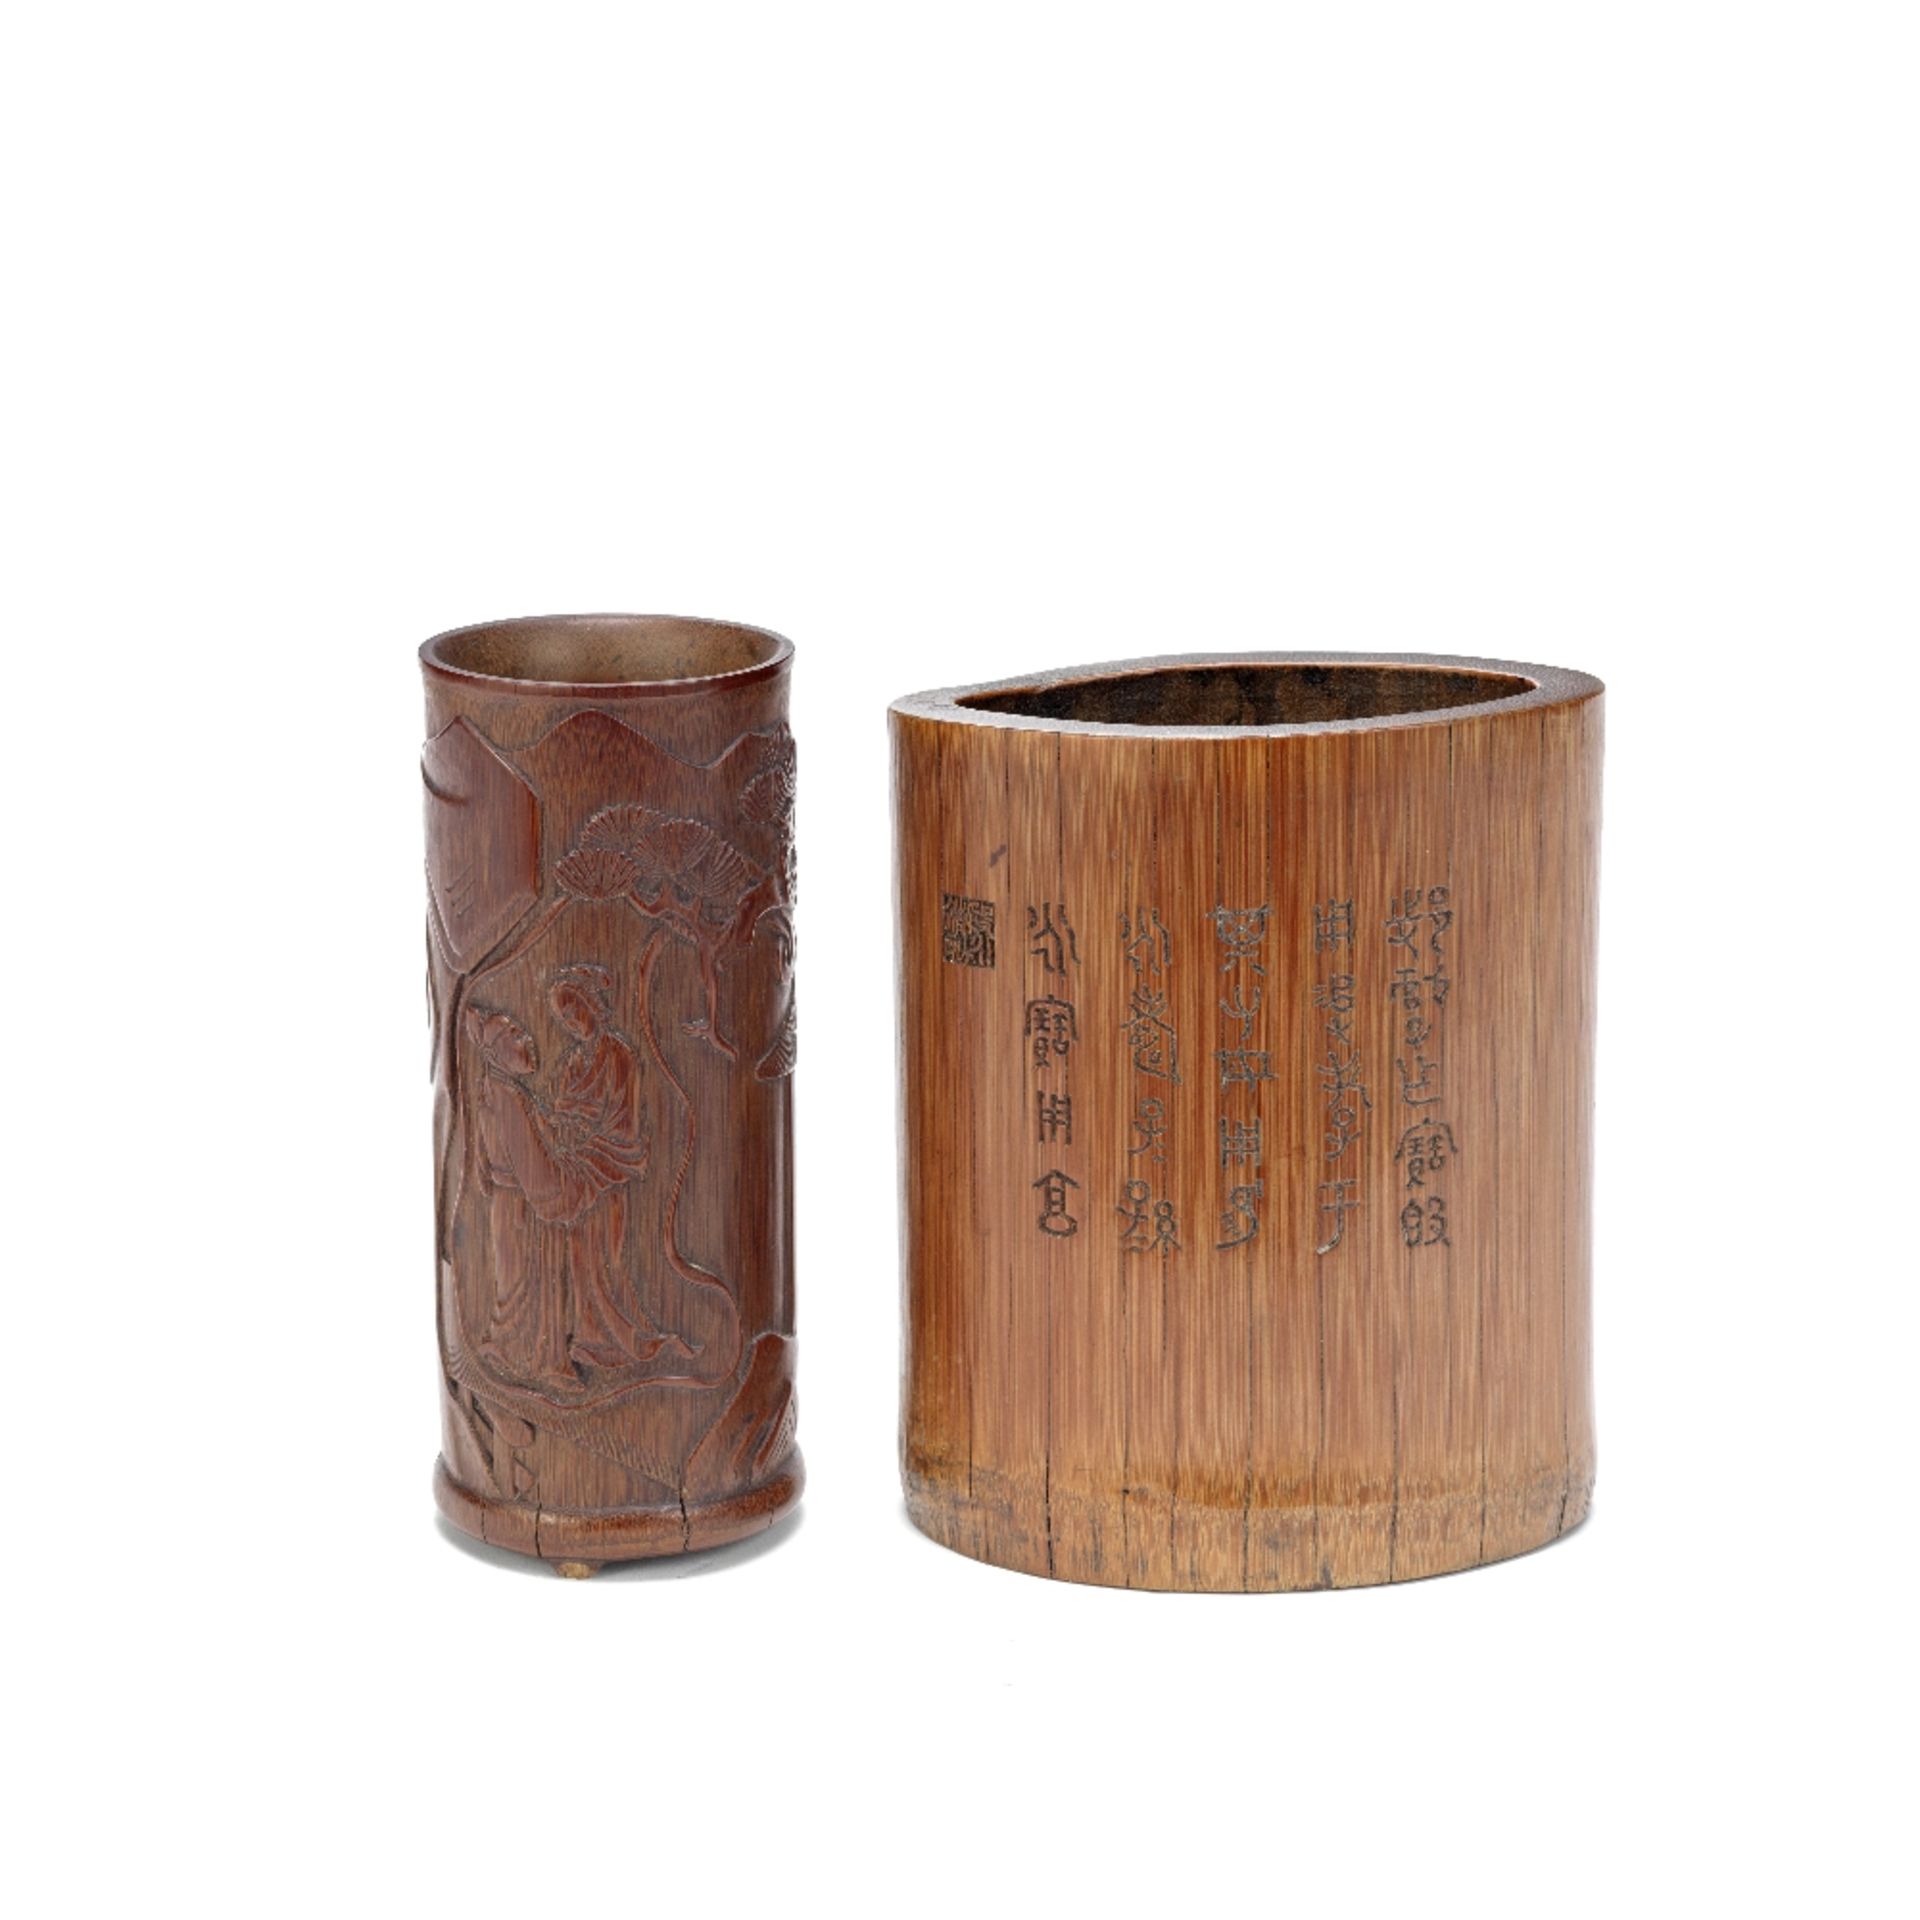 TWO CARVED BAMBOO BRUSH POTS, BITONG 19th century, each signed Yin Yongqing (2)